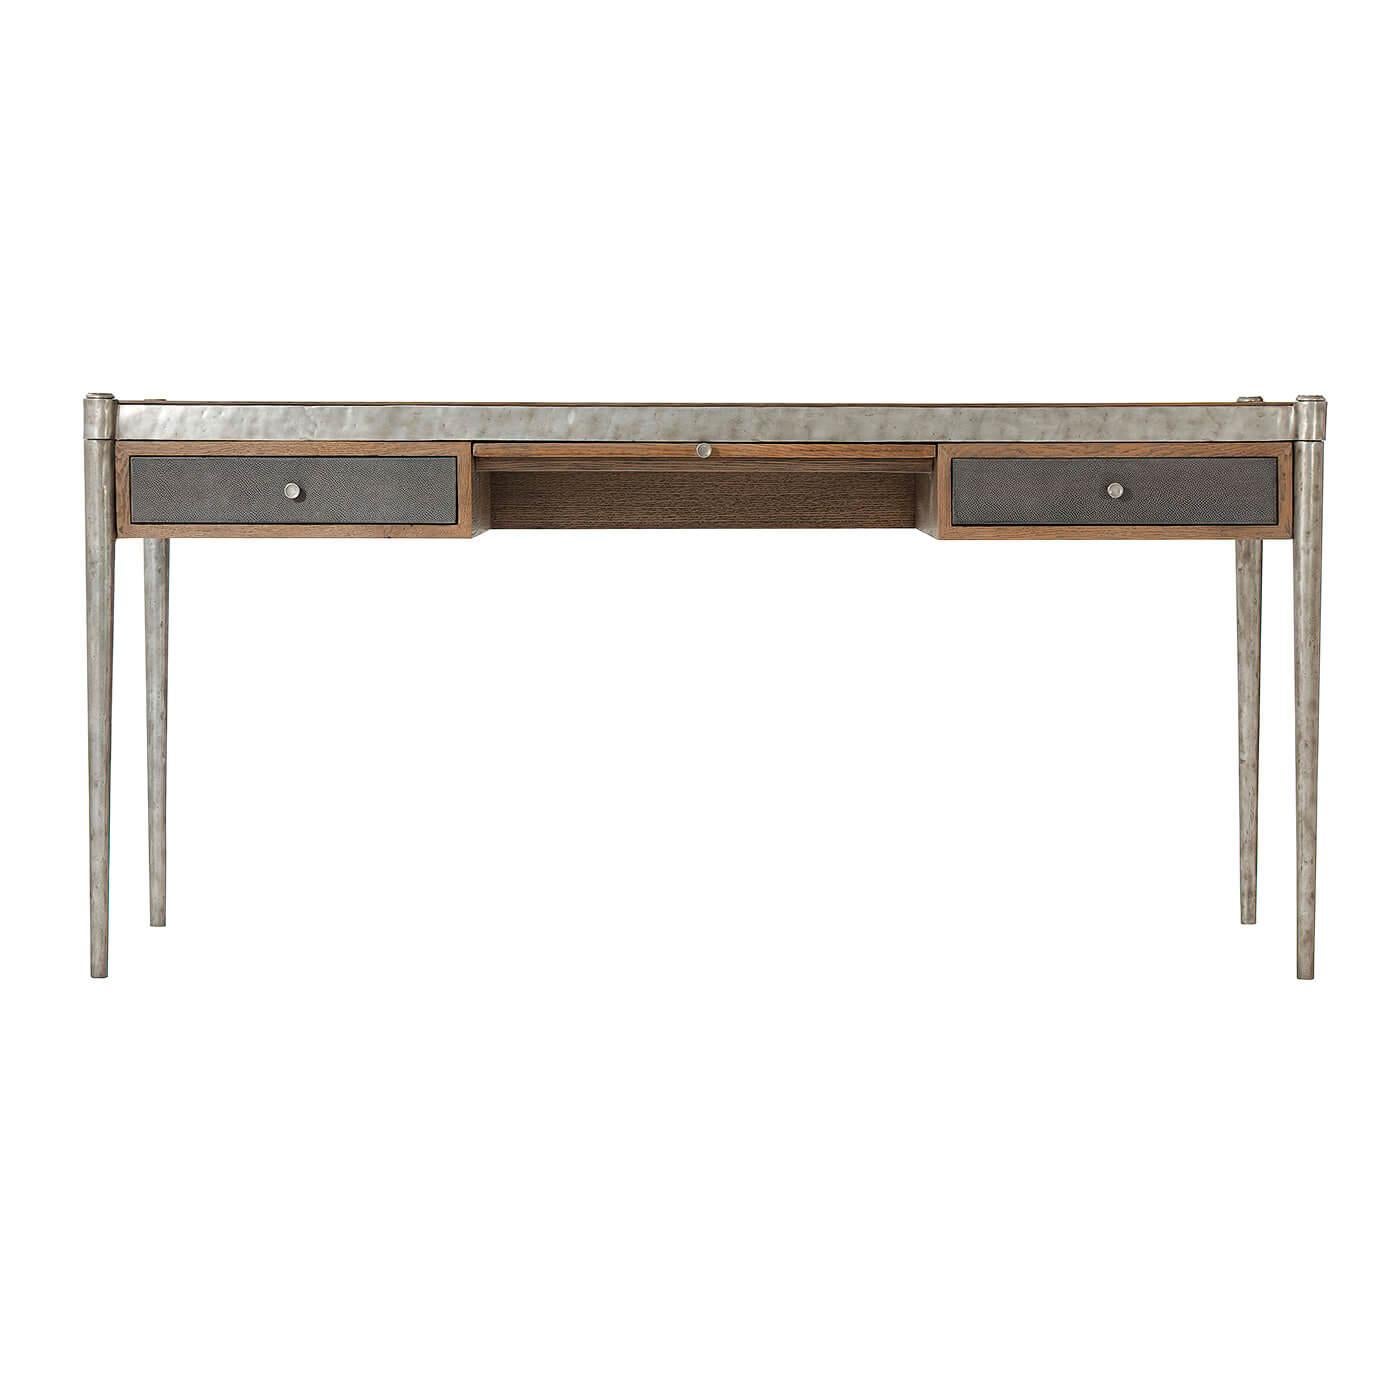 Modern industrial desk with cast 'Vintage' metal bound top and tapered pegs with a rustic oak parquetry inlaid top with a leather inset writing surface. With 'Echo Oak' finish and parquetry slide to frieze and shagreen embossed leather drawers and